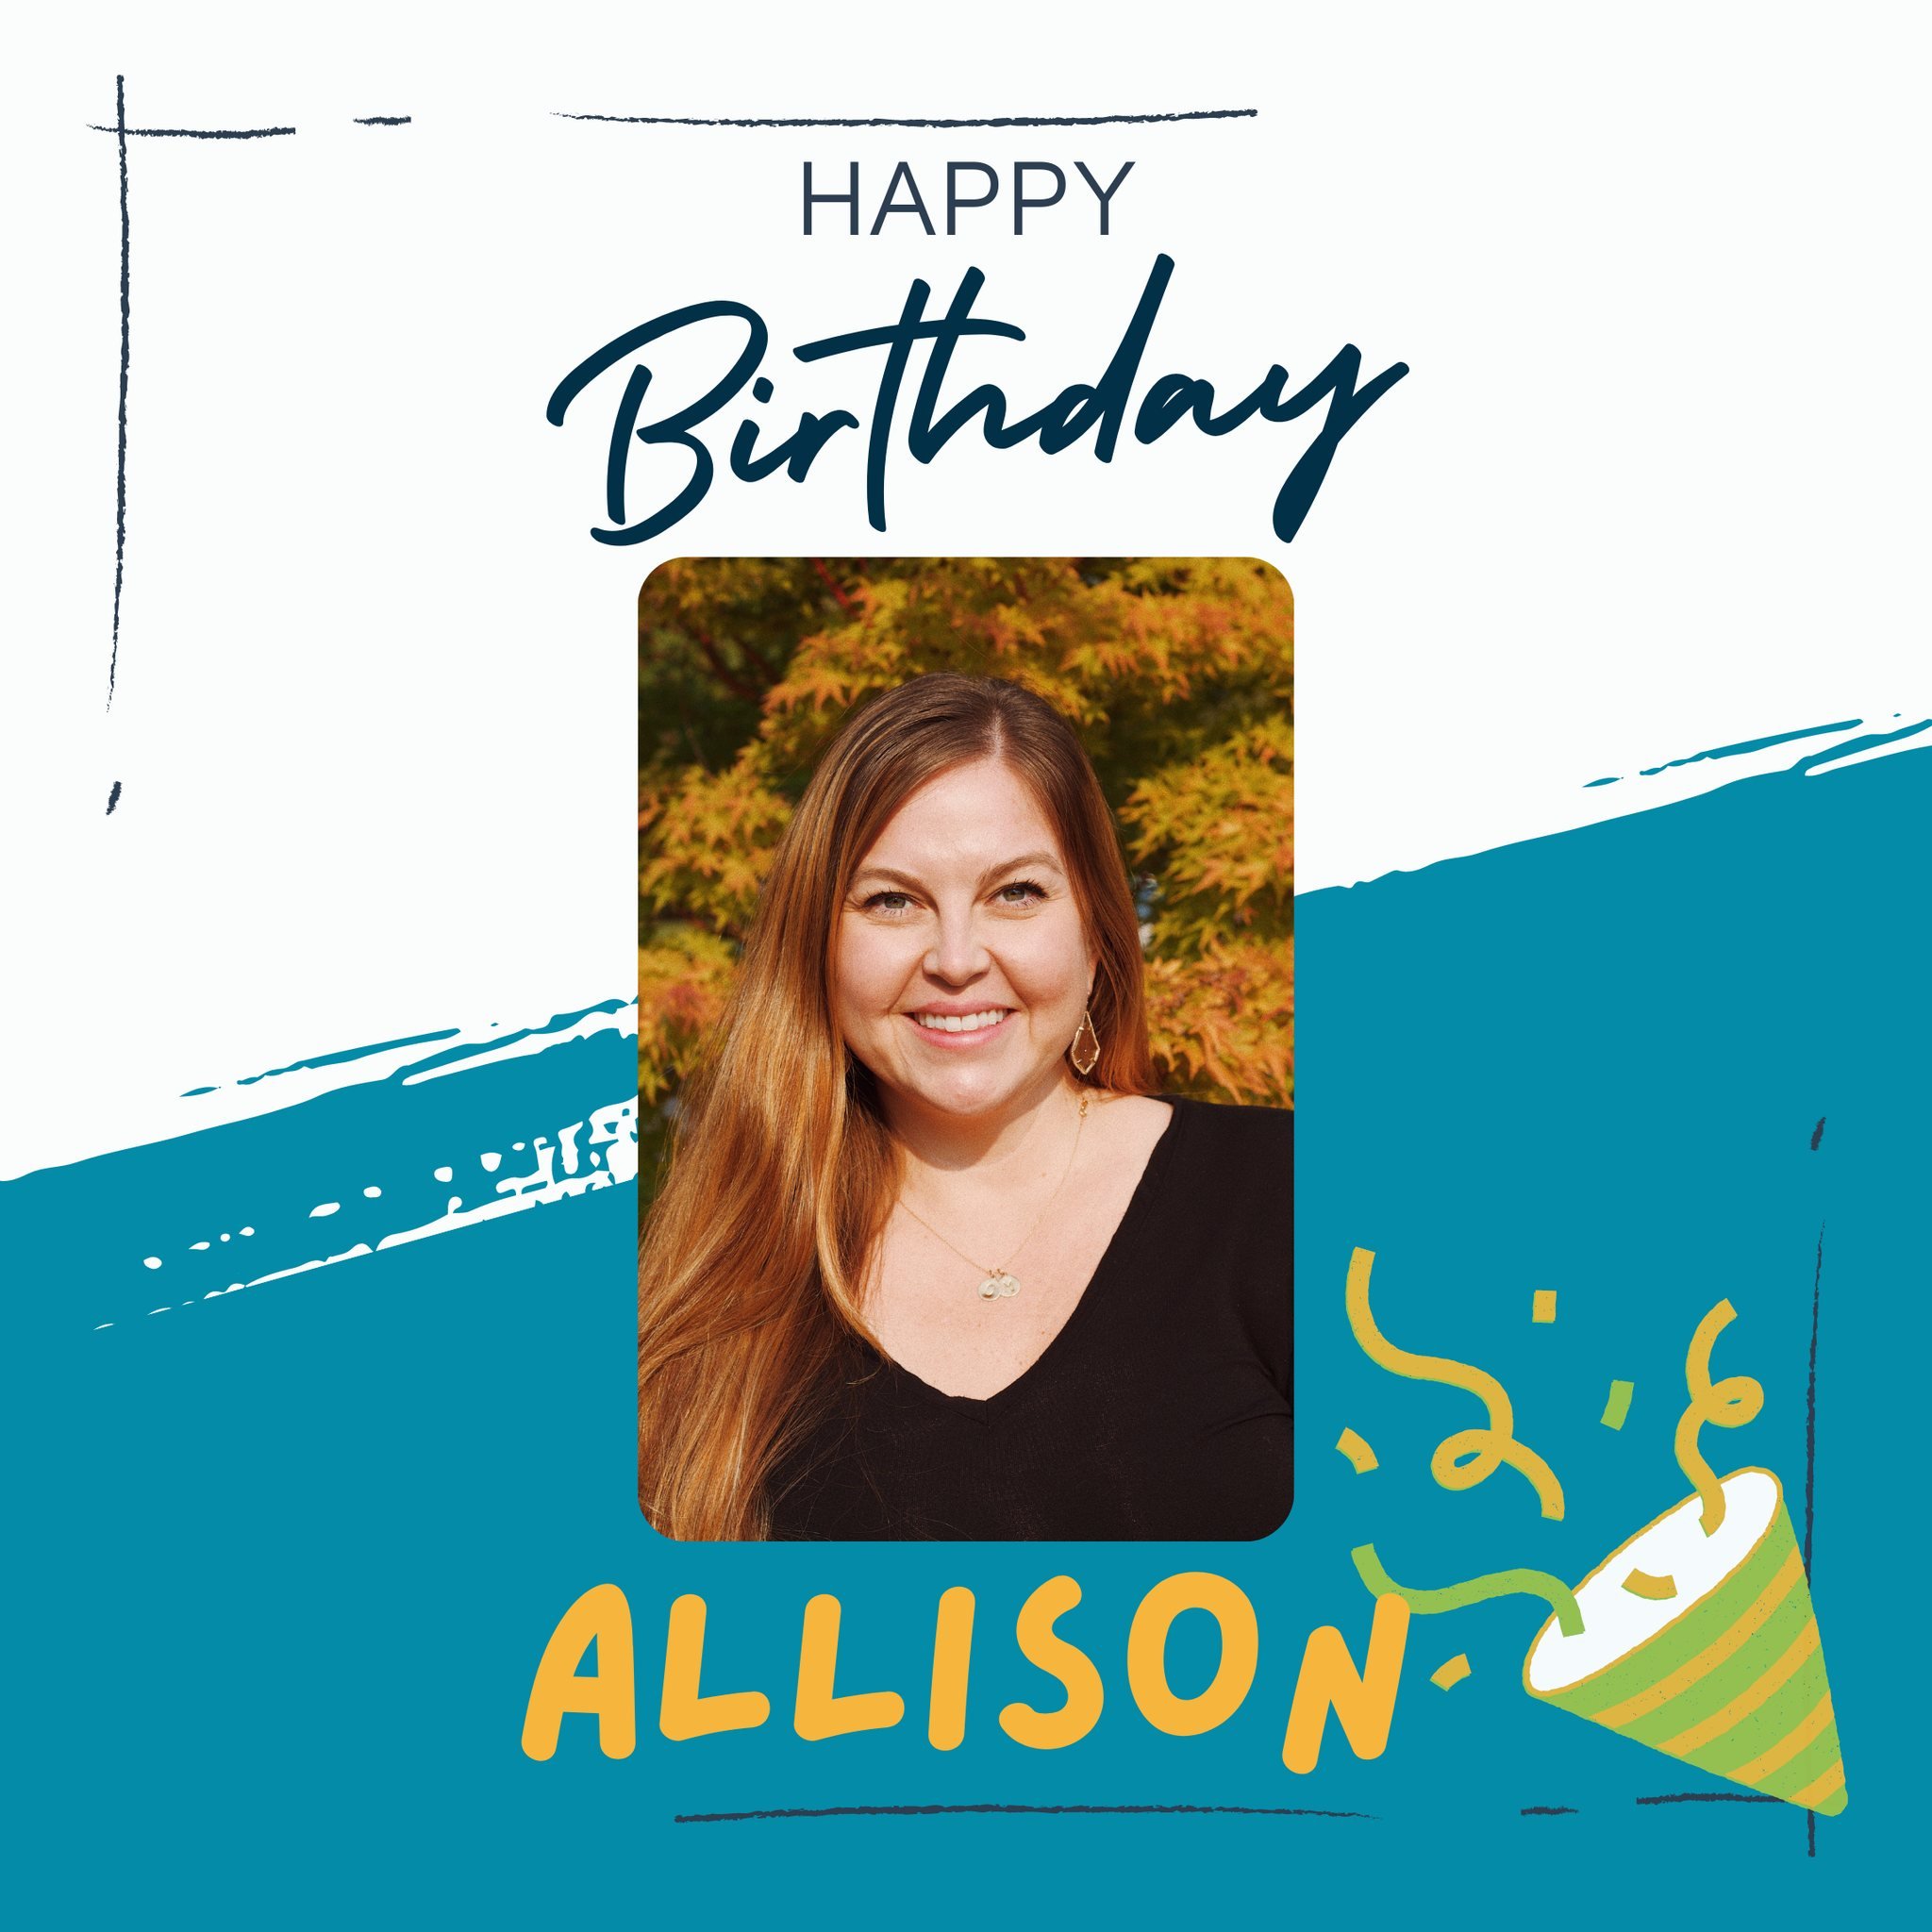 Happy Birthday, Allison! Your dedication as a speech-language therapist has brought countless voices to life, making the world a better place one word at a time. 🎉🎈